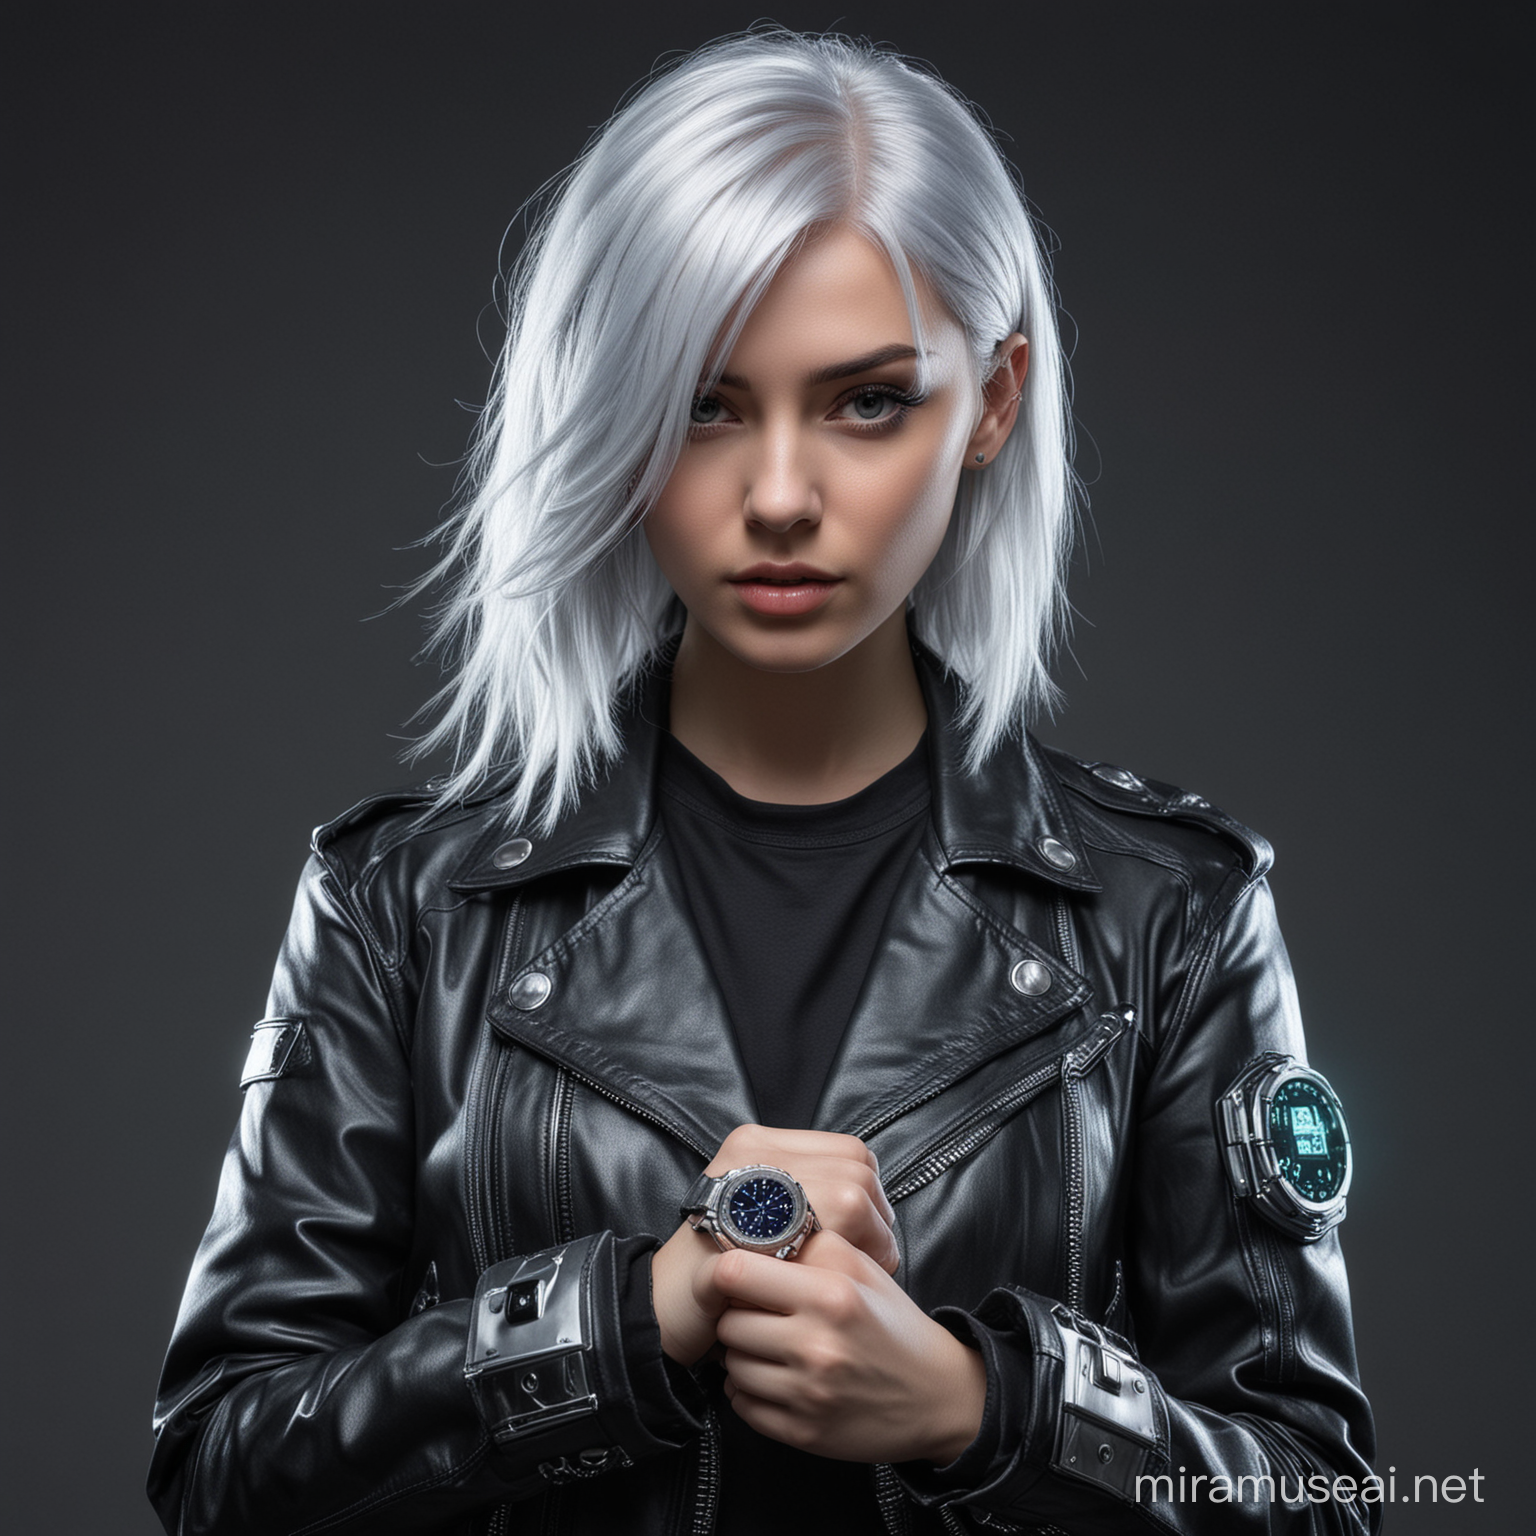 Cyberpunk Girl with Silver Hair and Holographic Watch